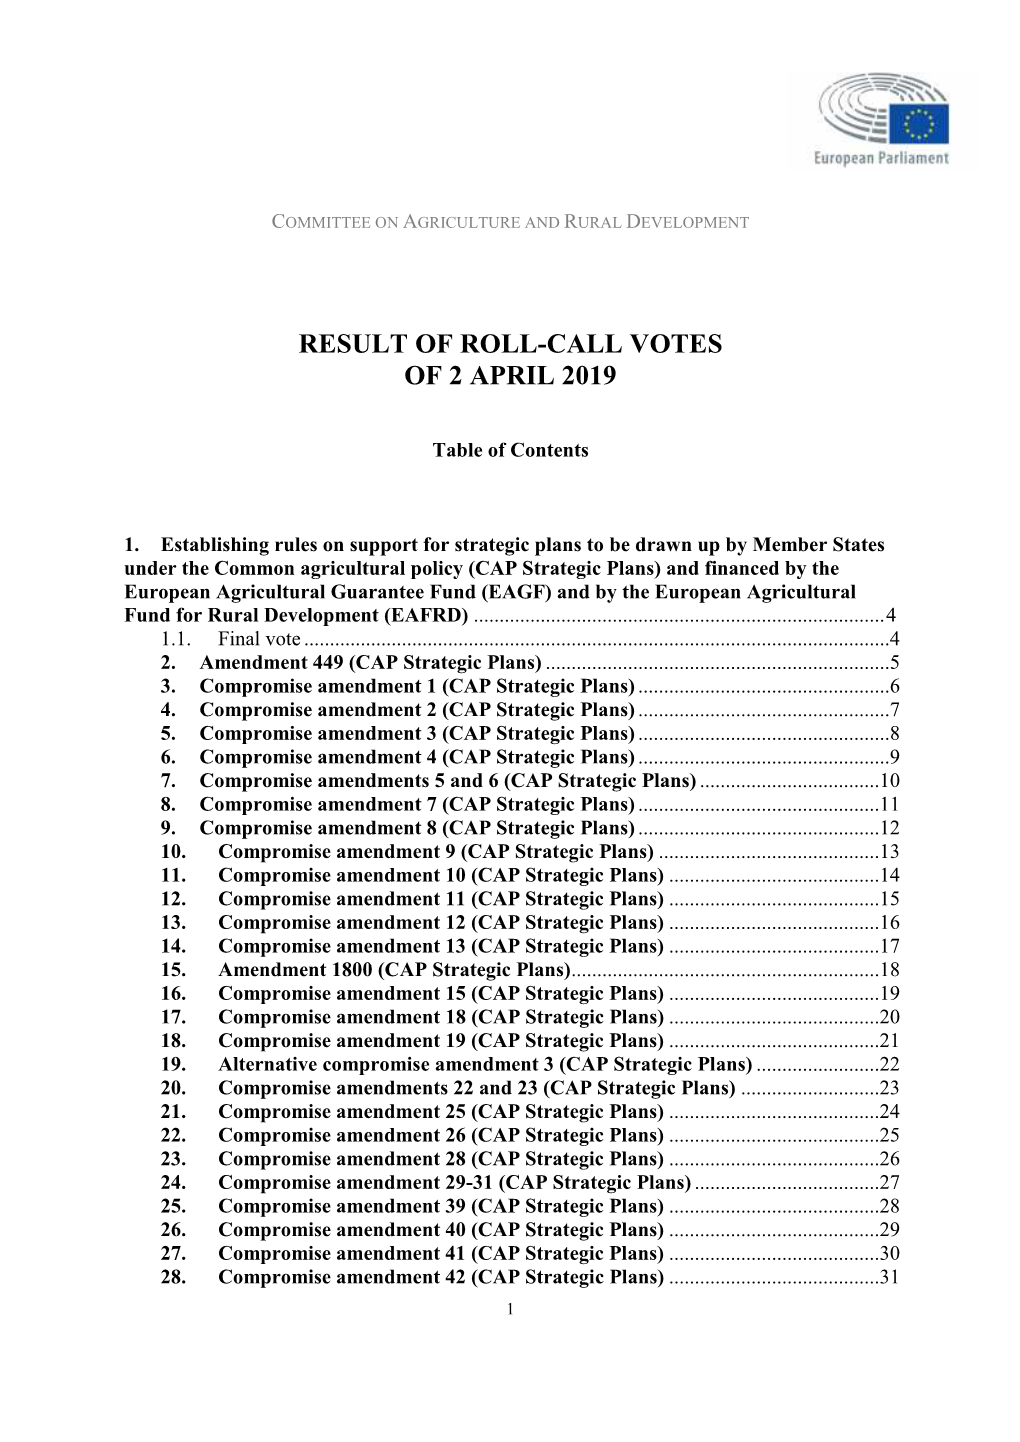 Result of Roll-Call Votes of 2 April 2019